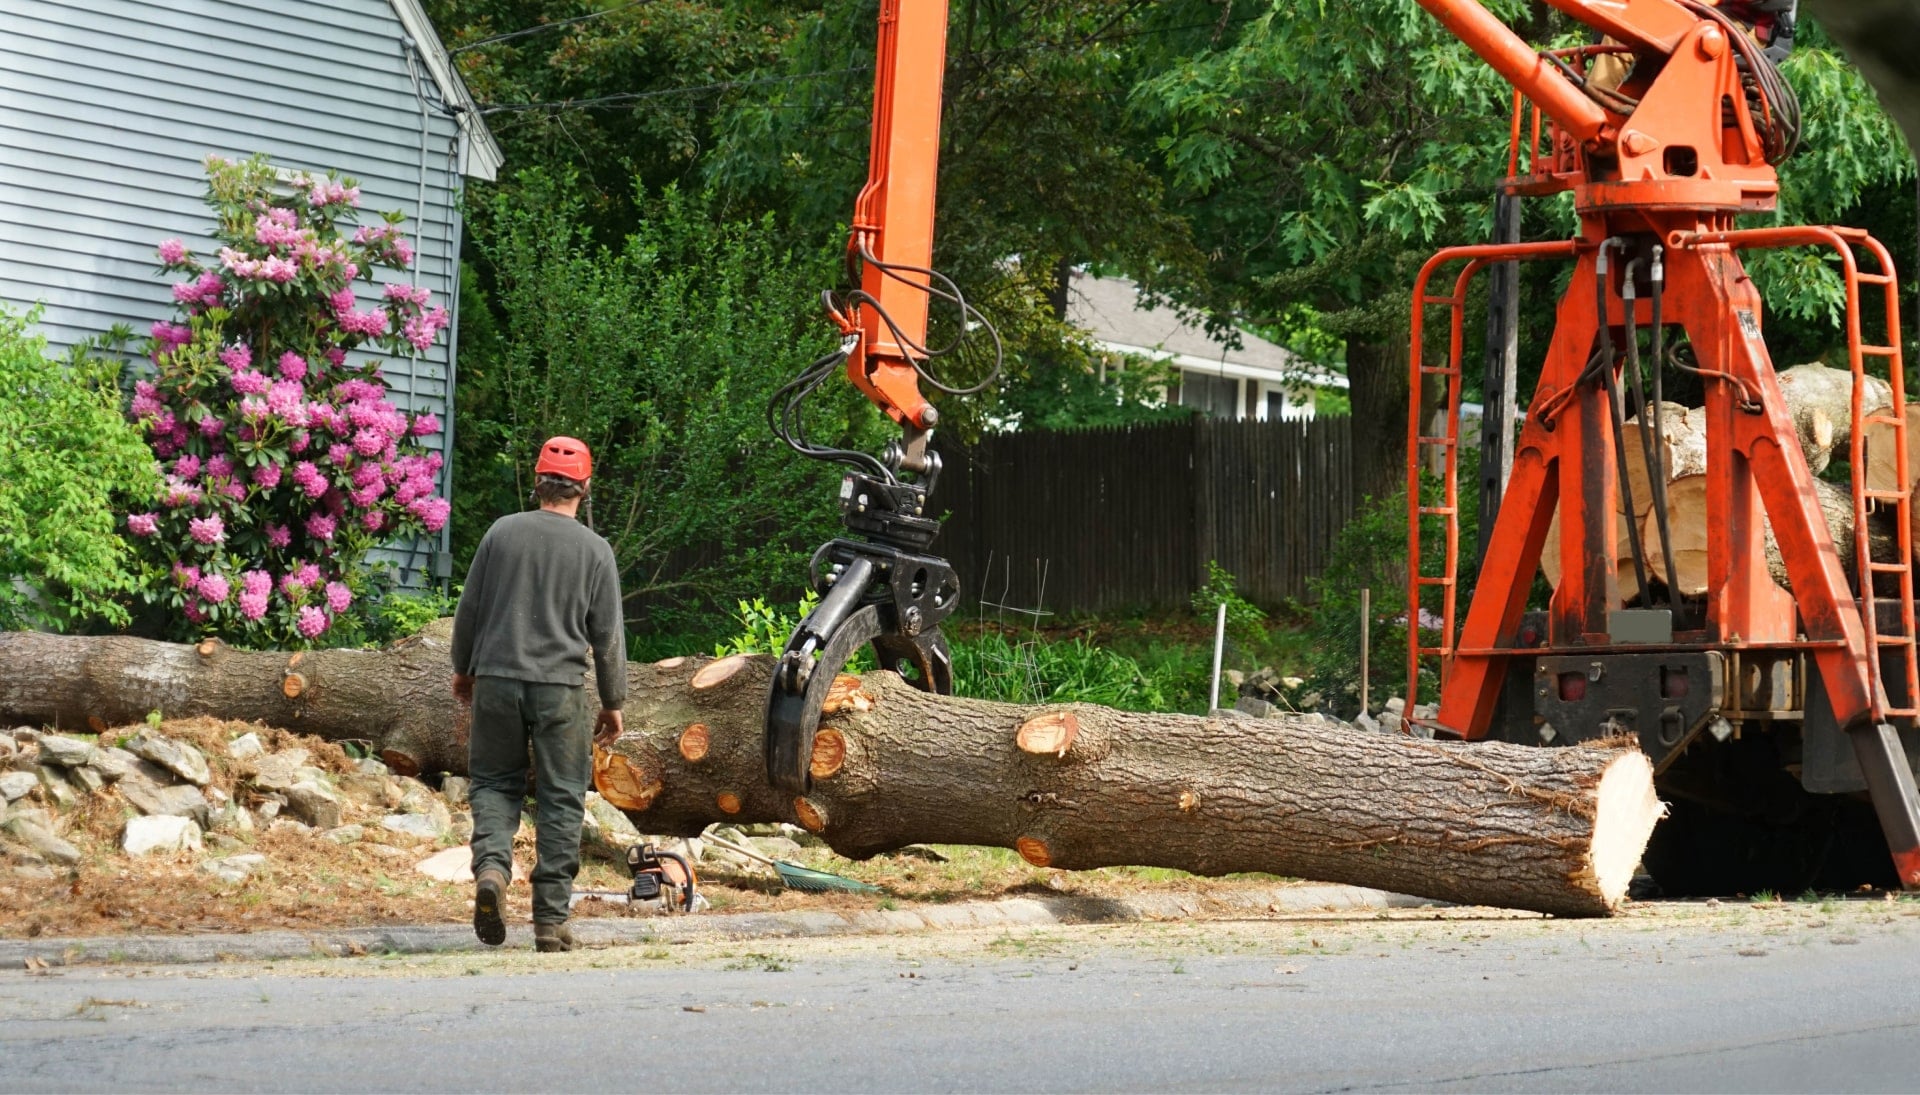 Local partner for Tree removal services in Lynchburg